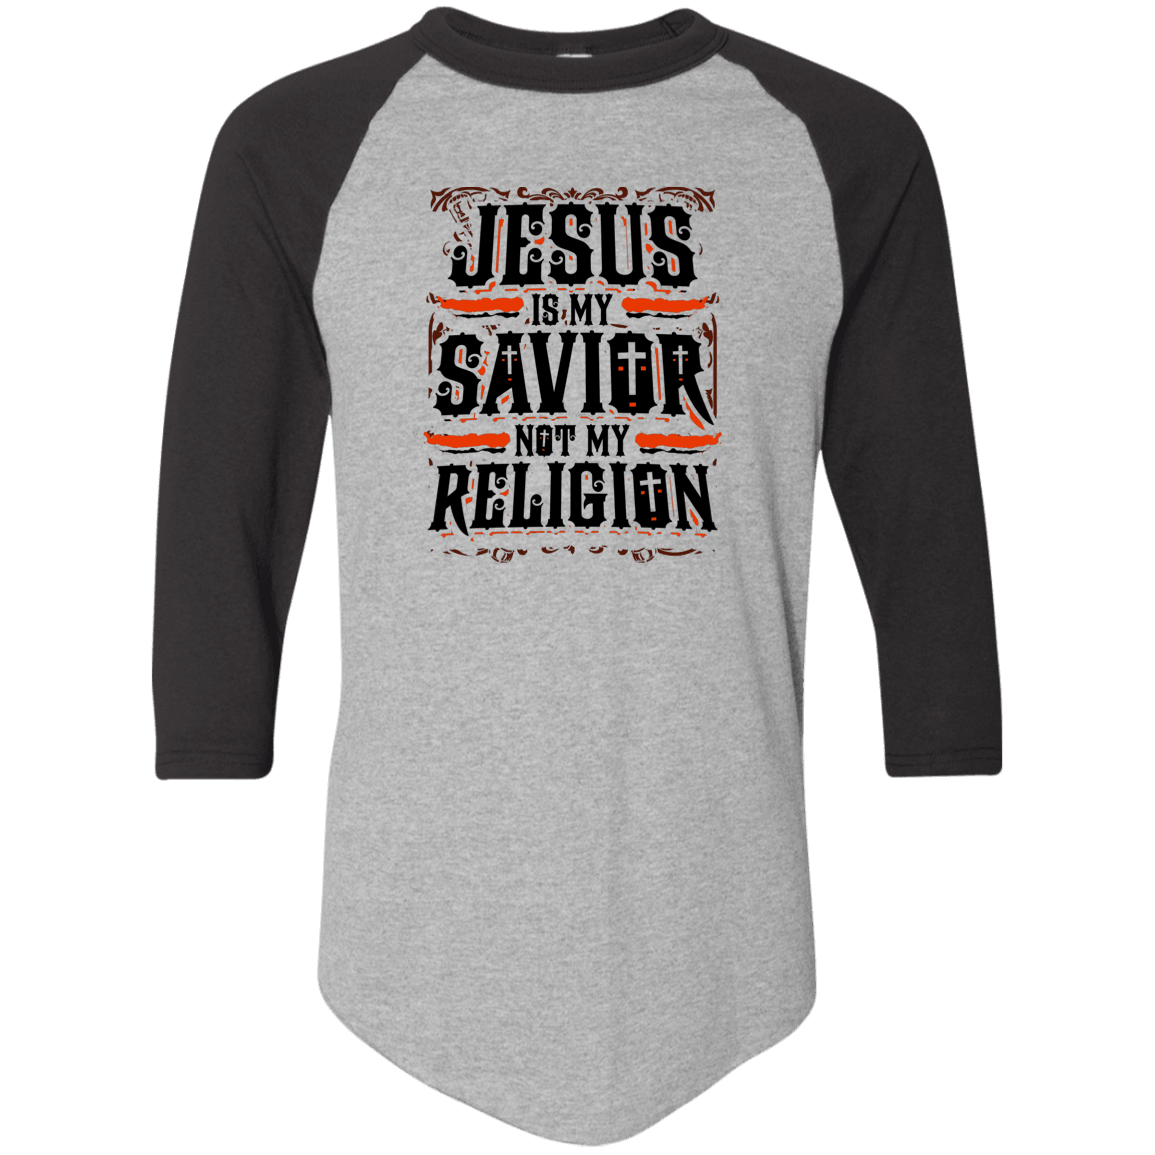 Designs by MyUtopia Shout Out:Jesus Is My Savior Not My Religion 3/4 Length Sleeve Color block Raglan Jersey T-Shirt,Athletic Heather/Black / S,Adult Unisex T-Shirt